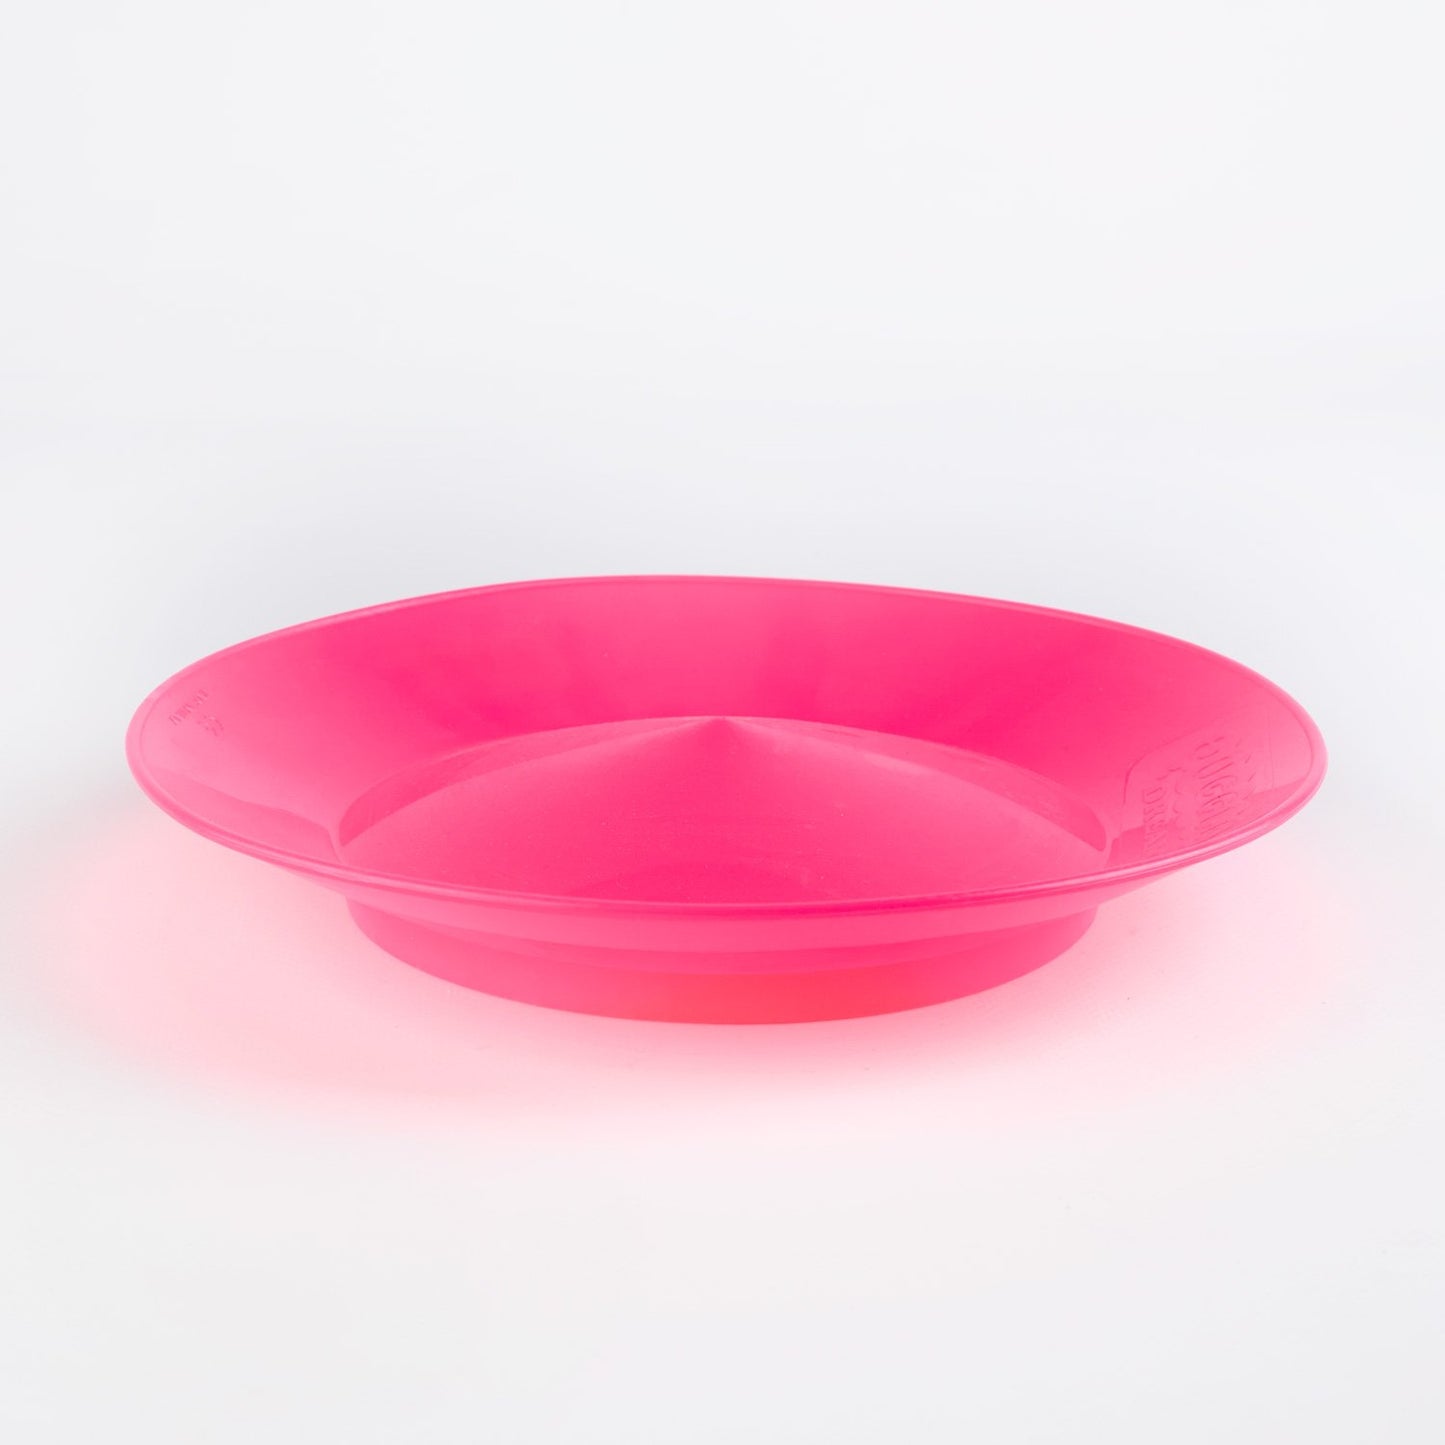 Spinning Plate (With Stick)